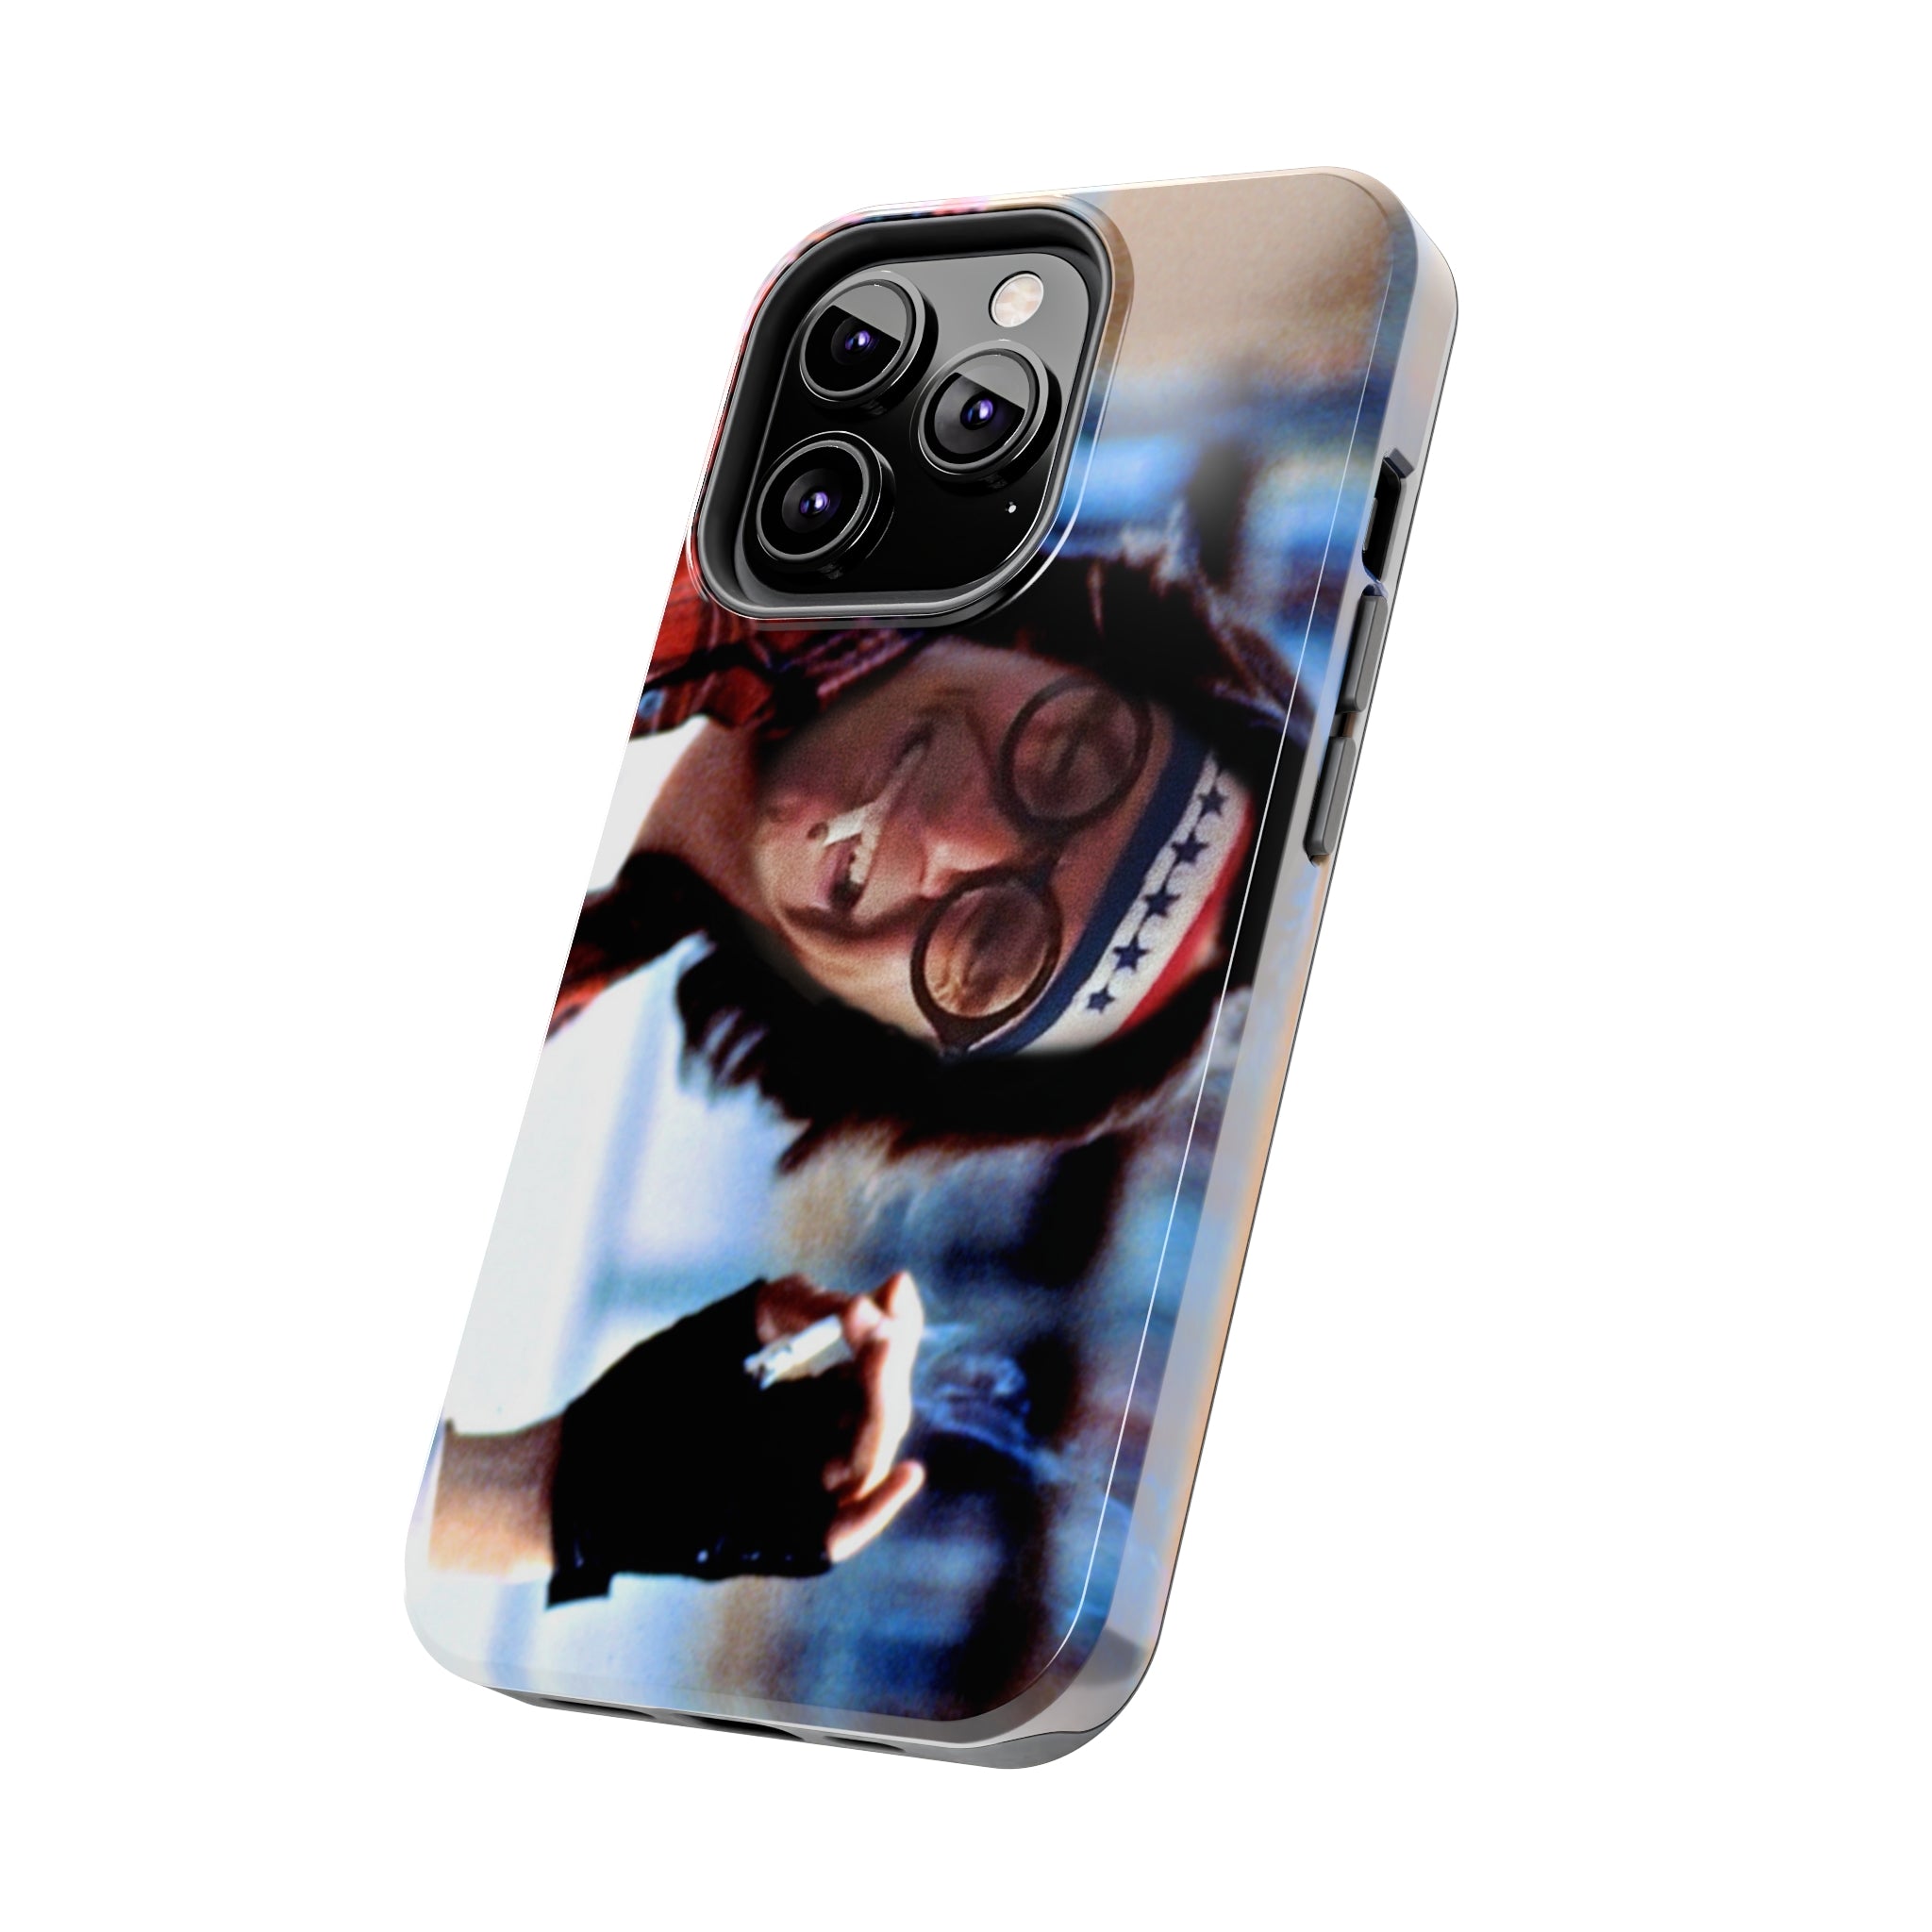 BREAKFAST CHIP Tough Phone Cases